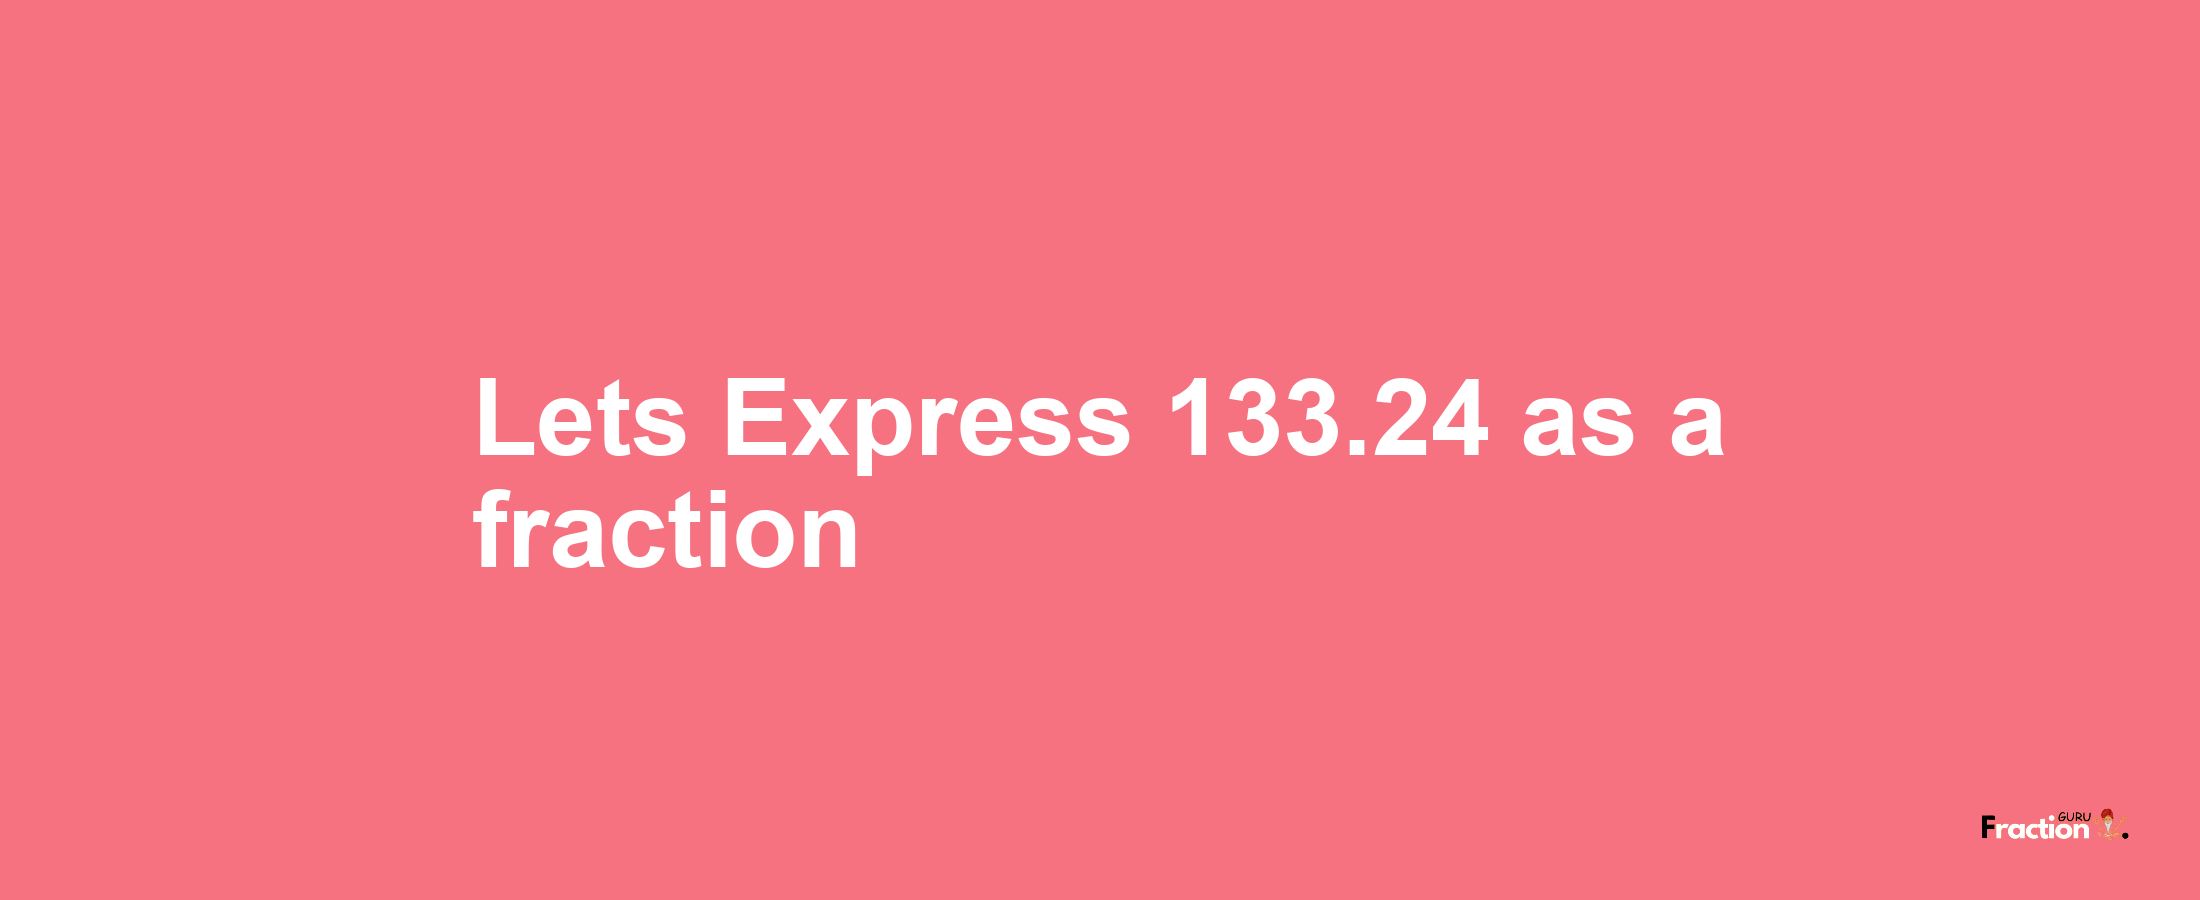 Lets Express 133.24 as afraction